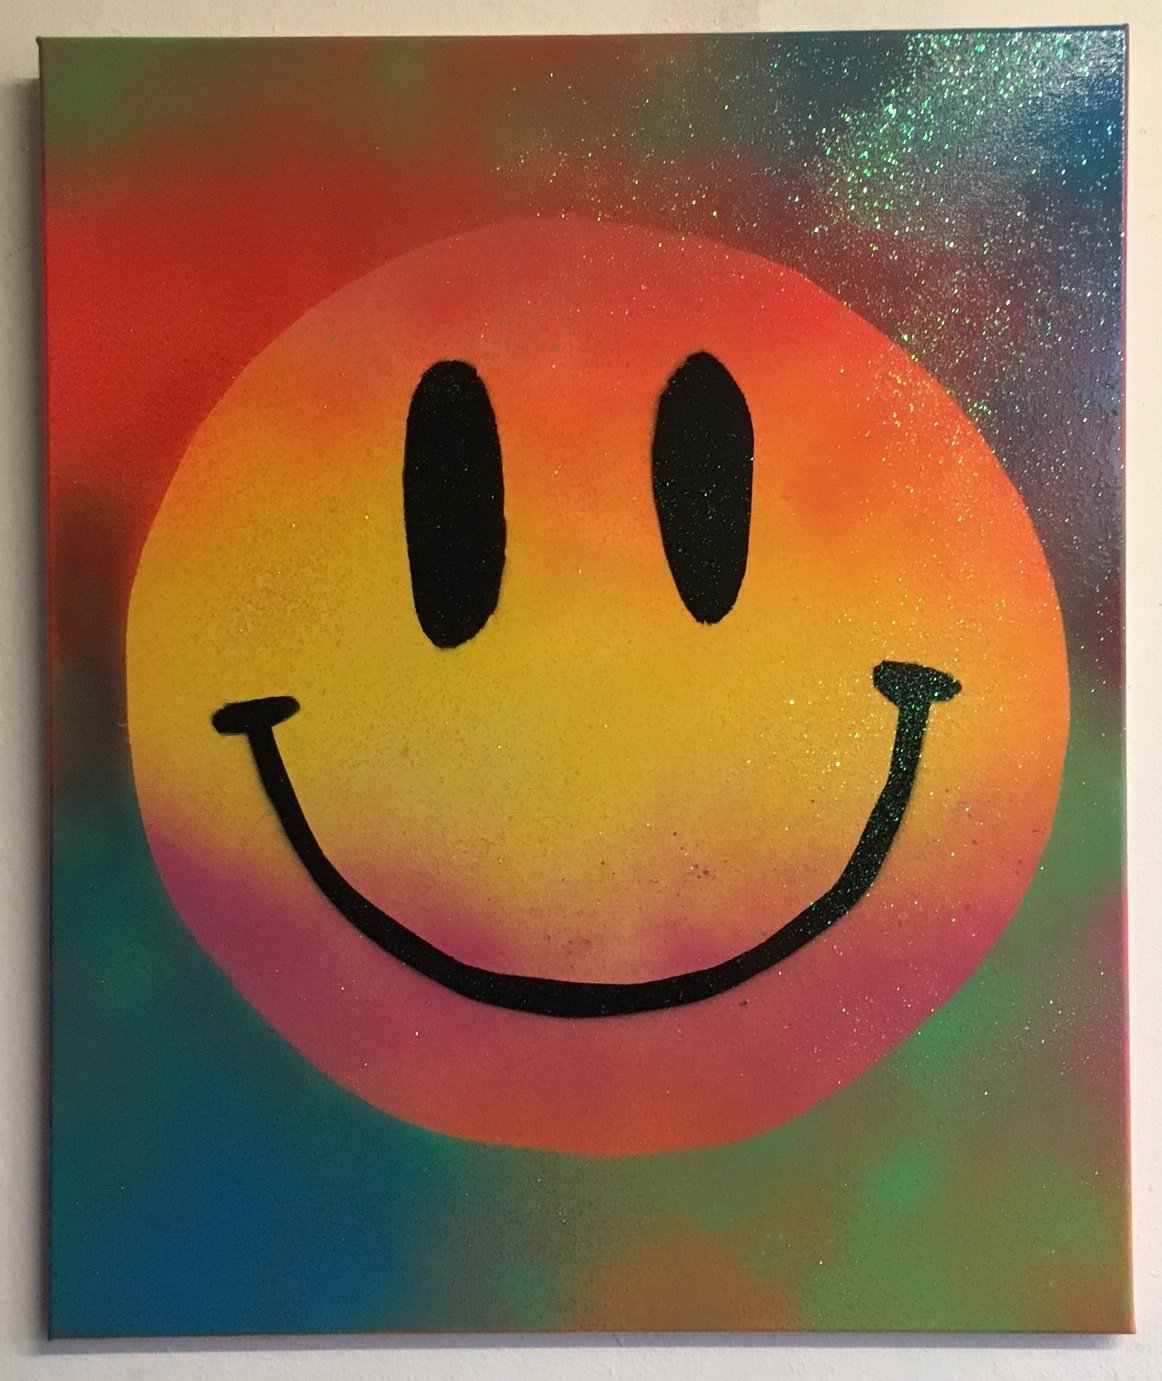 Happy Painting 8 by Barrie J Davies 2016, Mixed media painting on Canvas, 50cm x 60cm, Unframed. Barrie J Davies is an Artist - Pop Art and Street art inspired Artist based in Brighton England UK - Pop Art Paintings, Street Art Prints & Editions available.